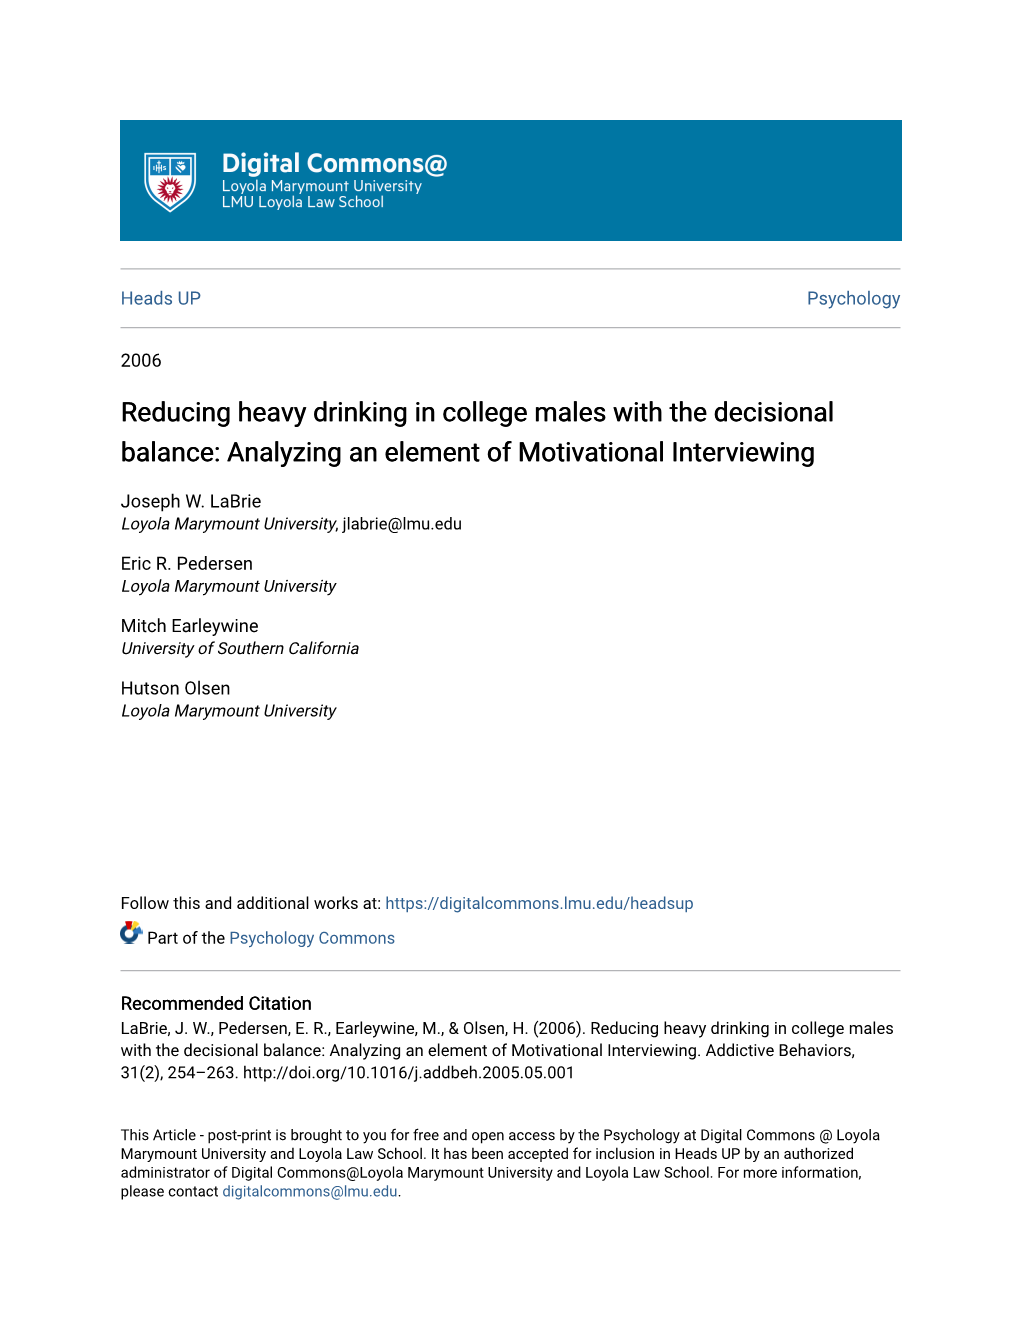 Reducing Heavy Drinking in College Males with the Decisional Balance: Analyzing an Element of Motivational Interviewing